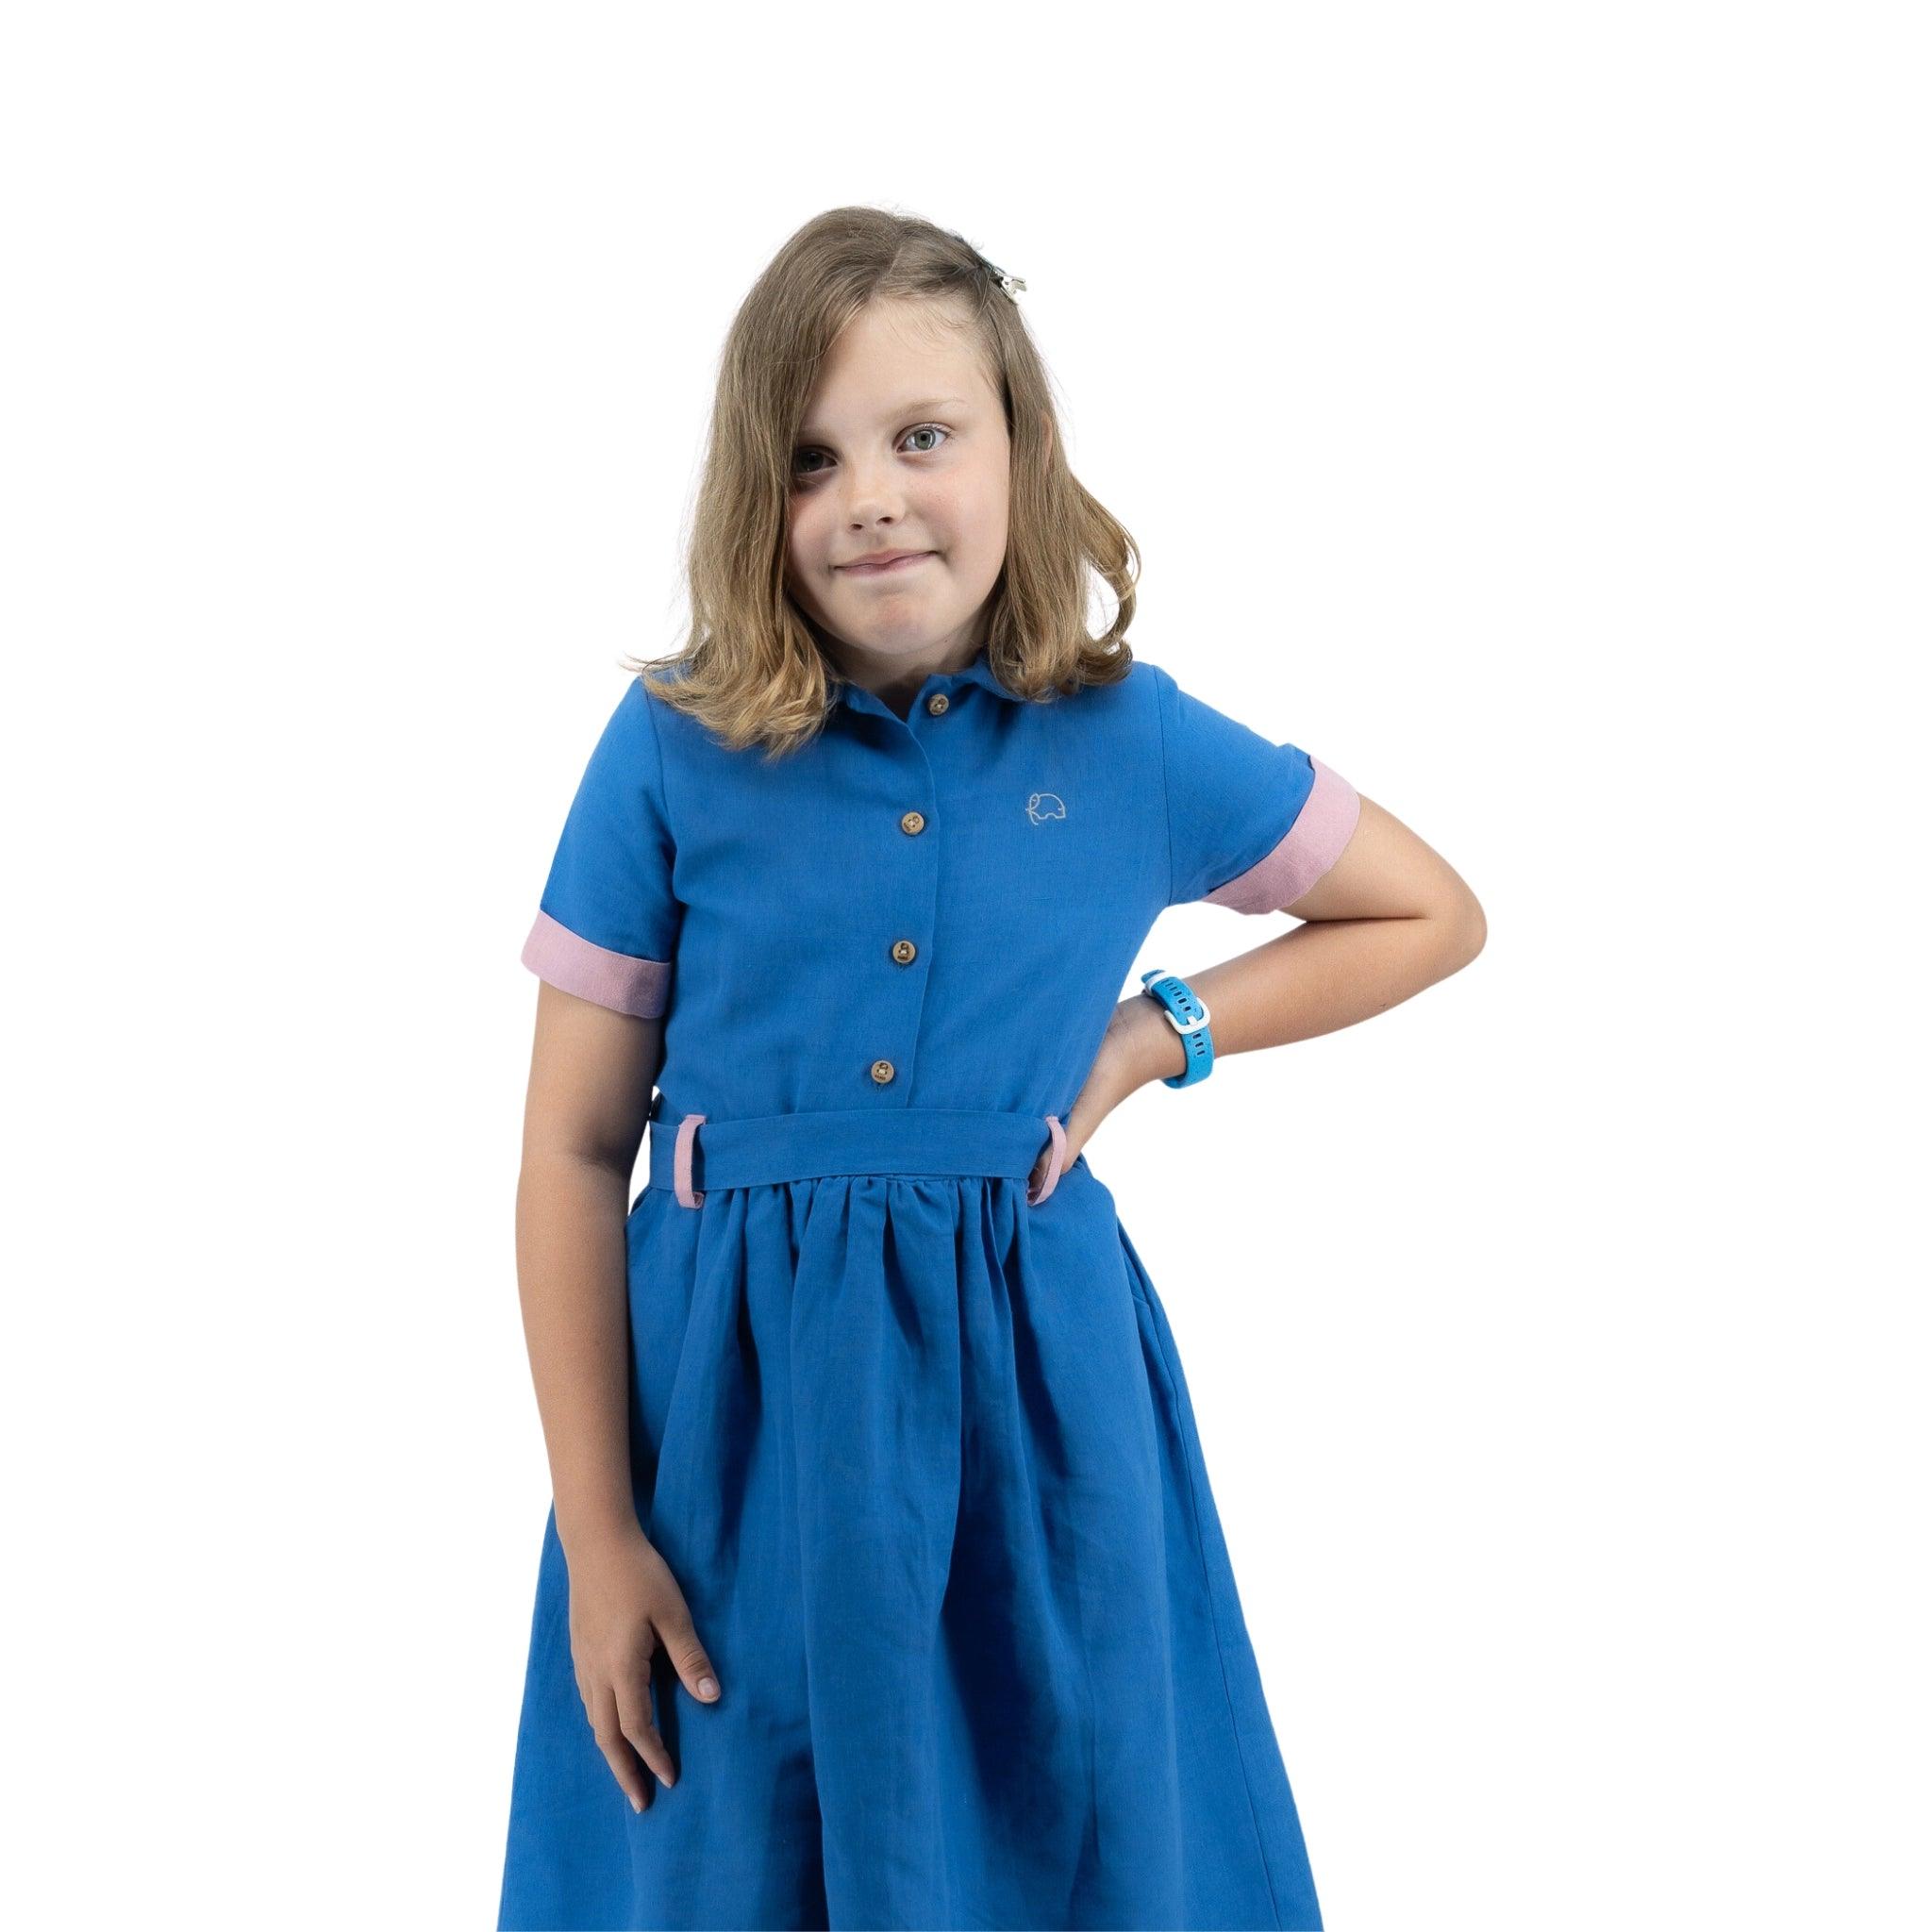 Young girl in a Karee Parisian Blue Linen Dress for Girls with hands on hips, smiling slightly, standing against a white background.